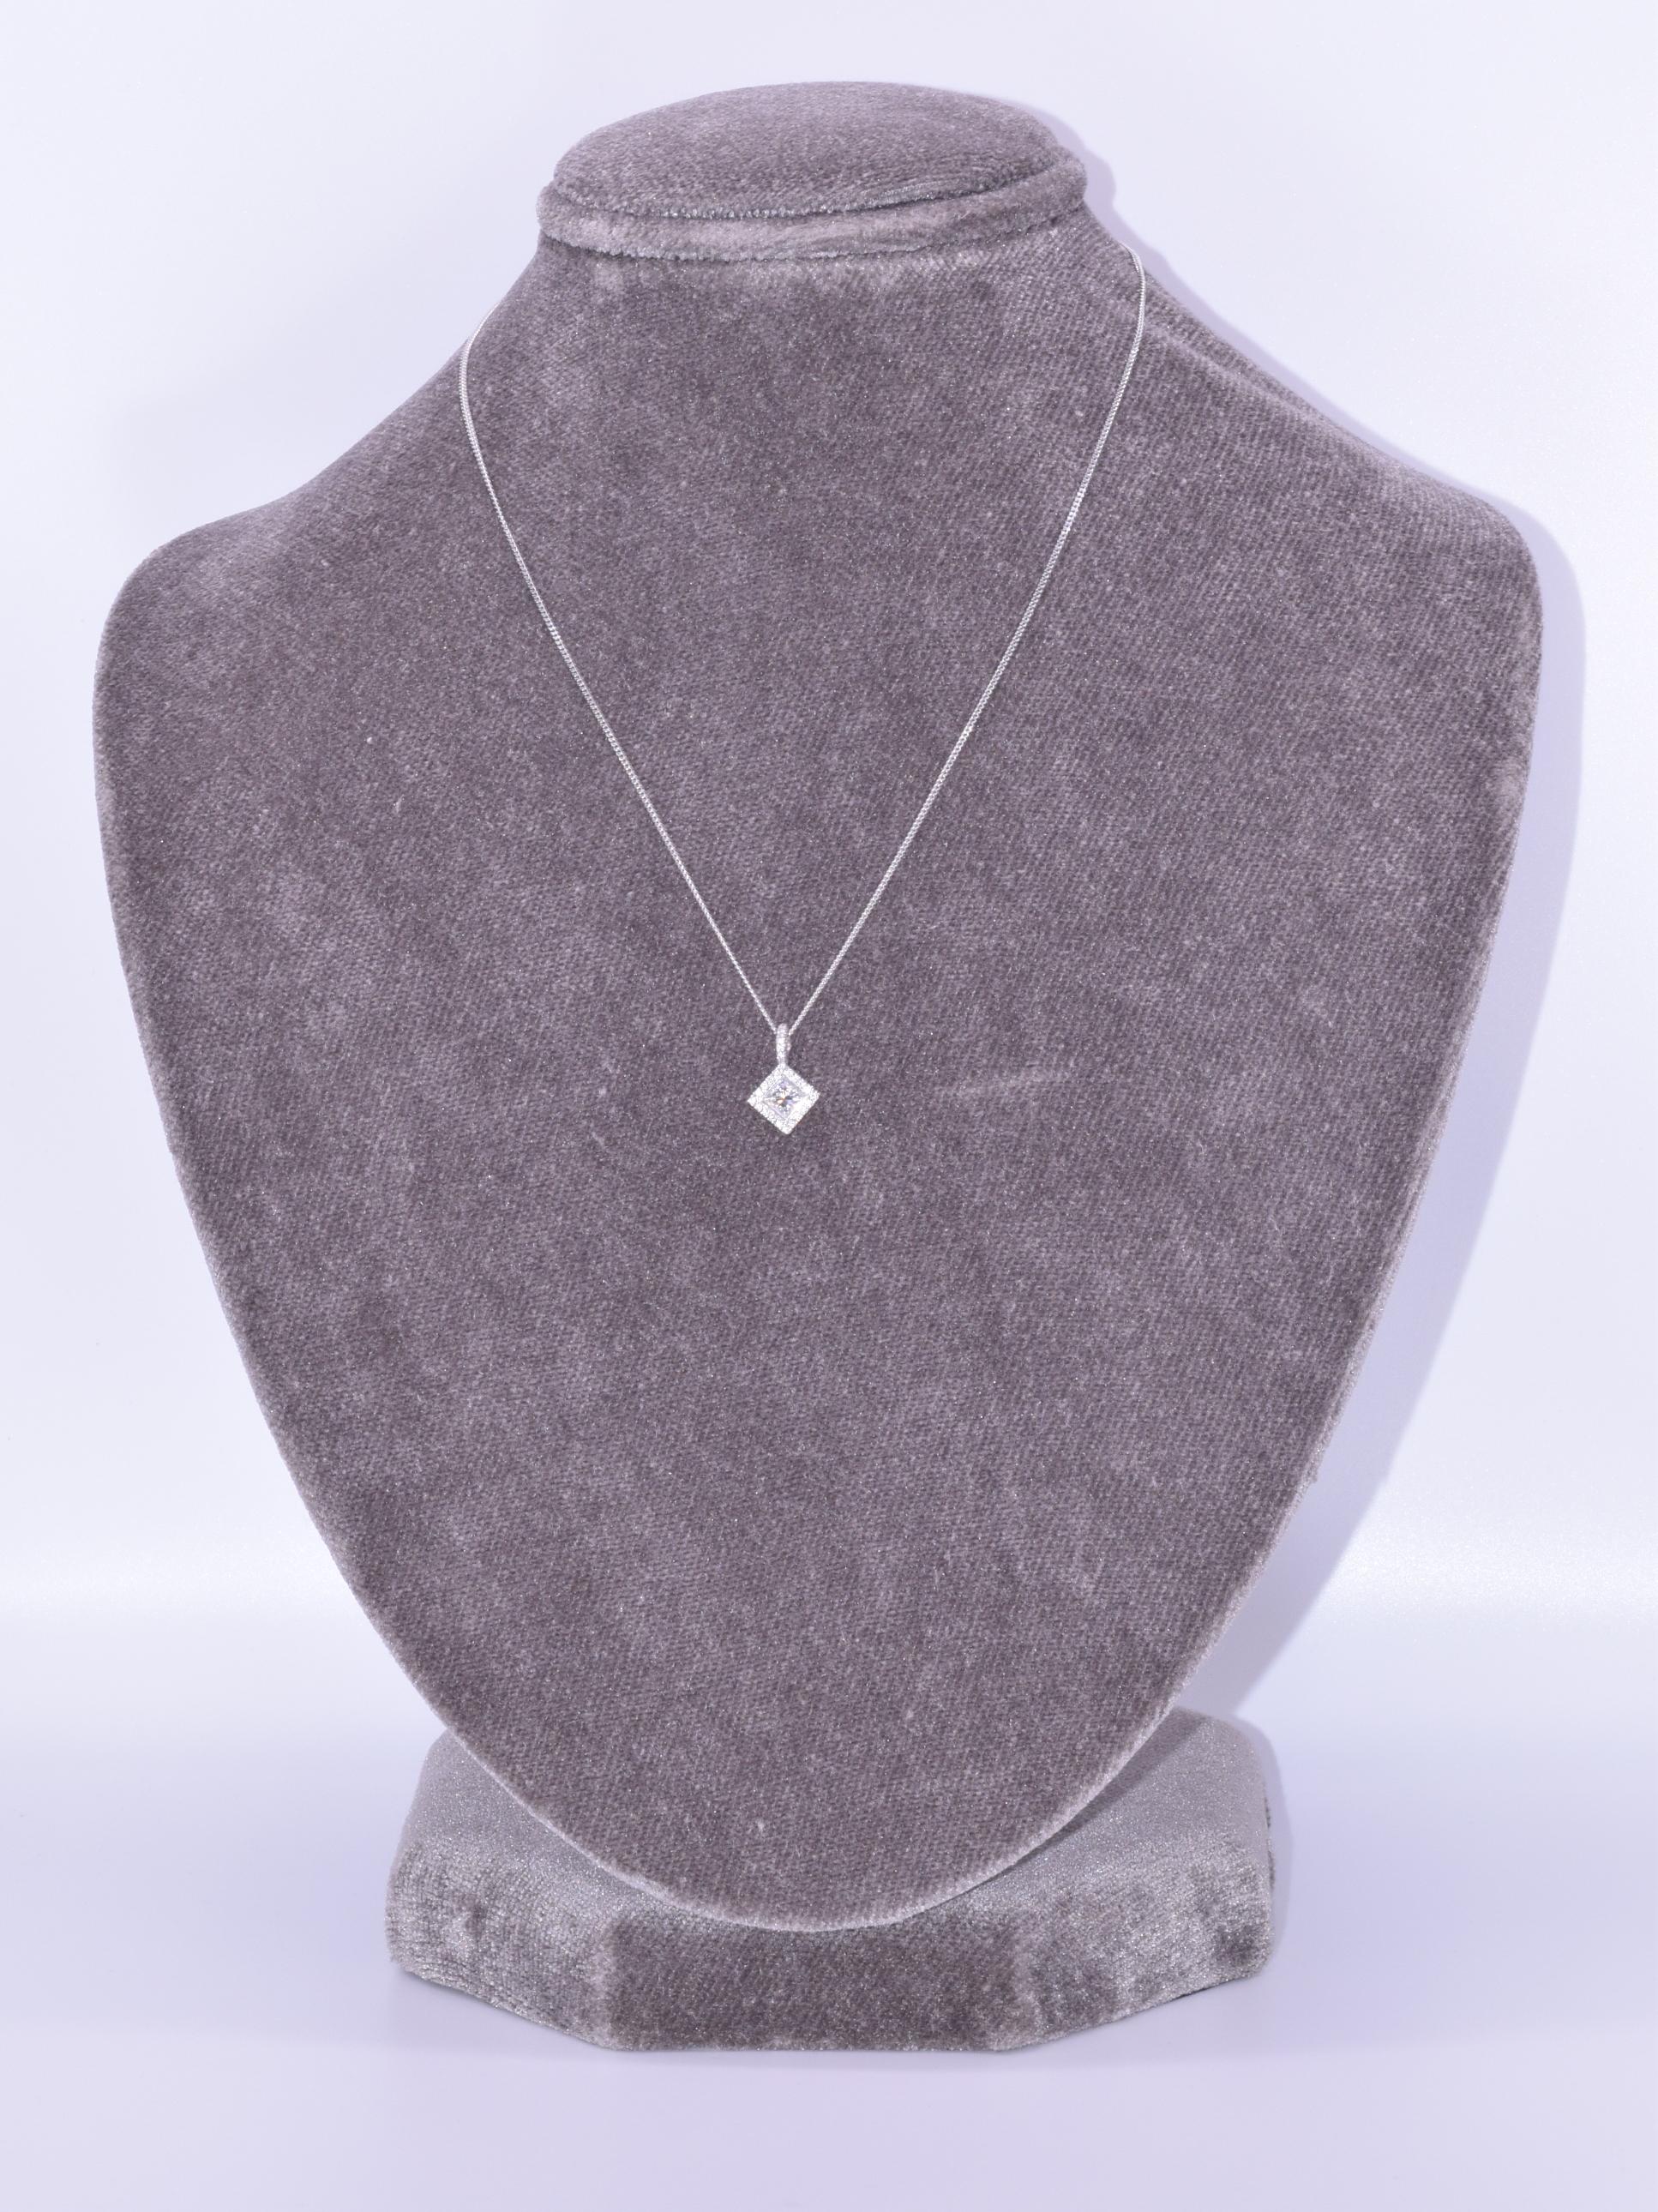 18k White Gold Diamond Pendant, Signed Kwiat

This pendant is from the Silhouette Collection with  one princess cut and 25 round brilliant diamonds totaling 0.65 carat, HI/VS mounted in 18k white gold.  The necklace is 16 inches in length.  The